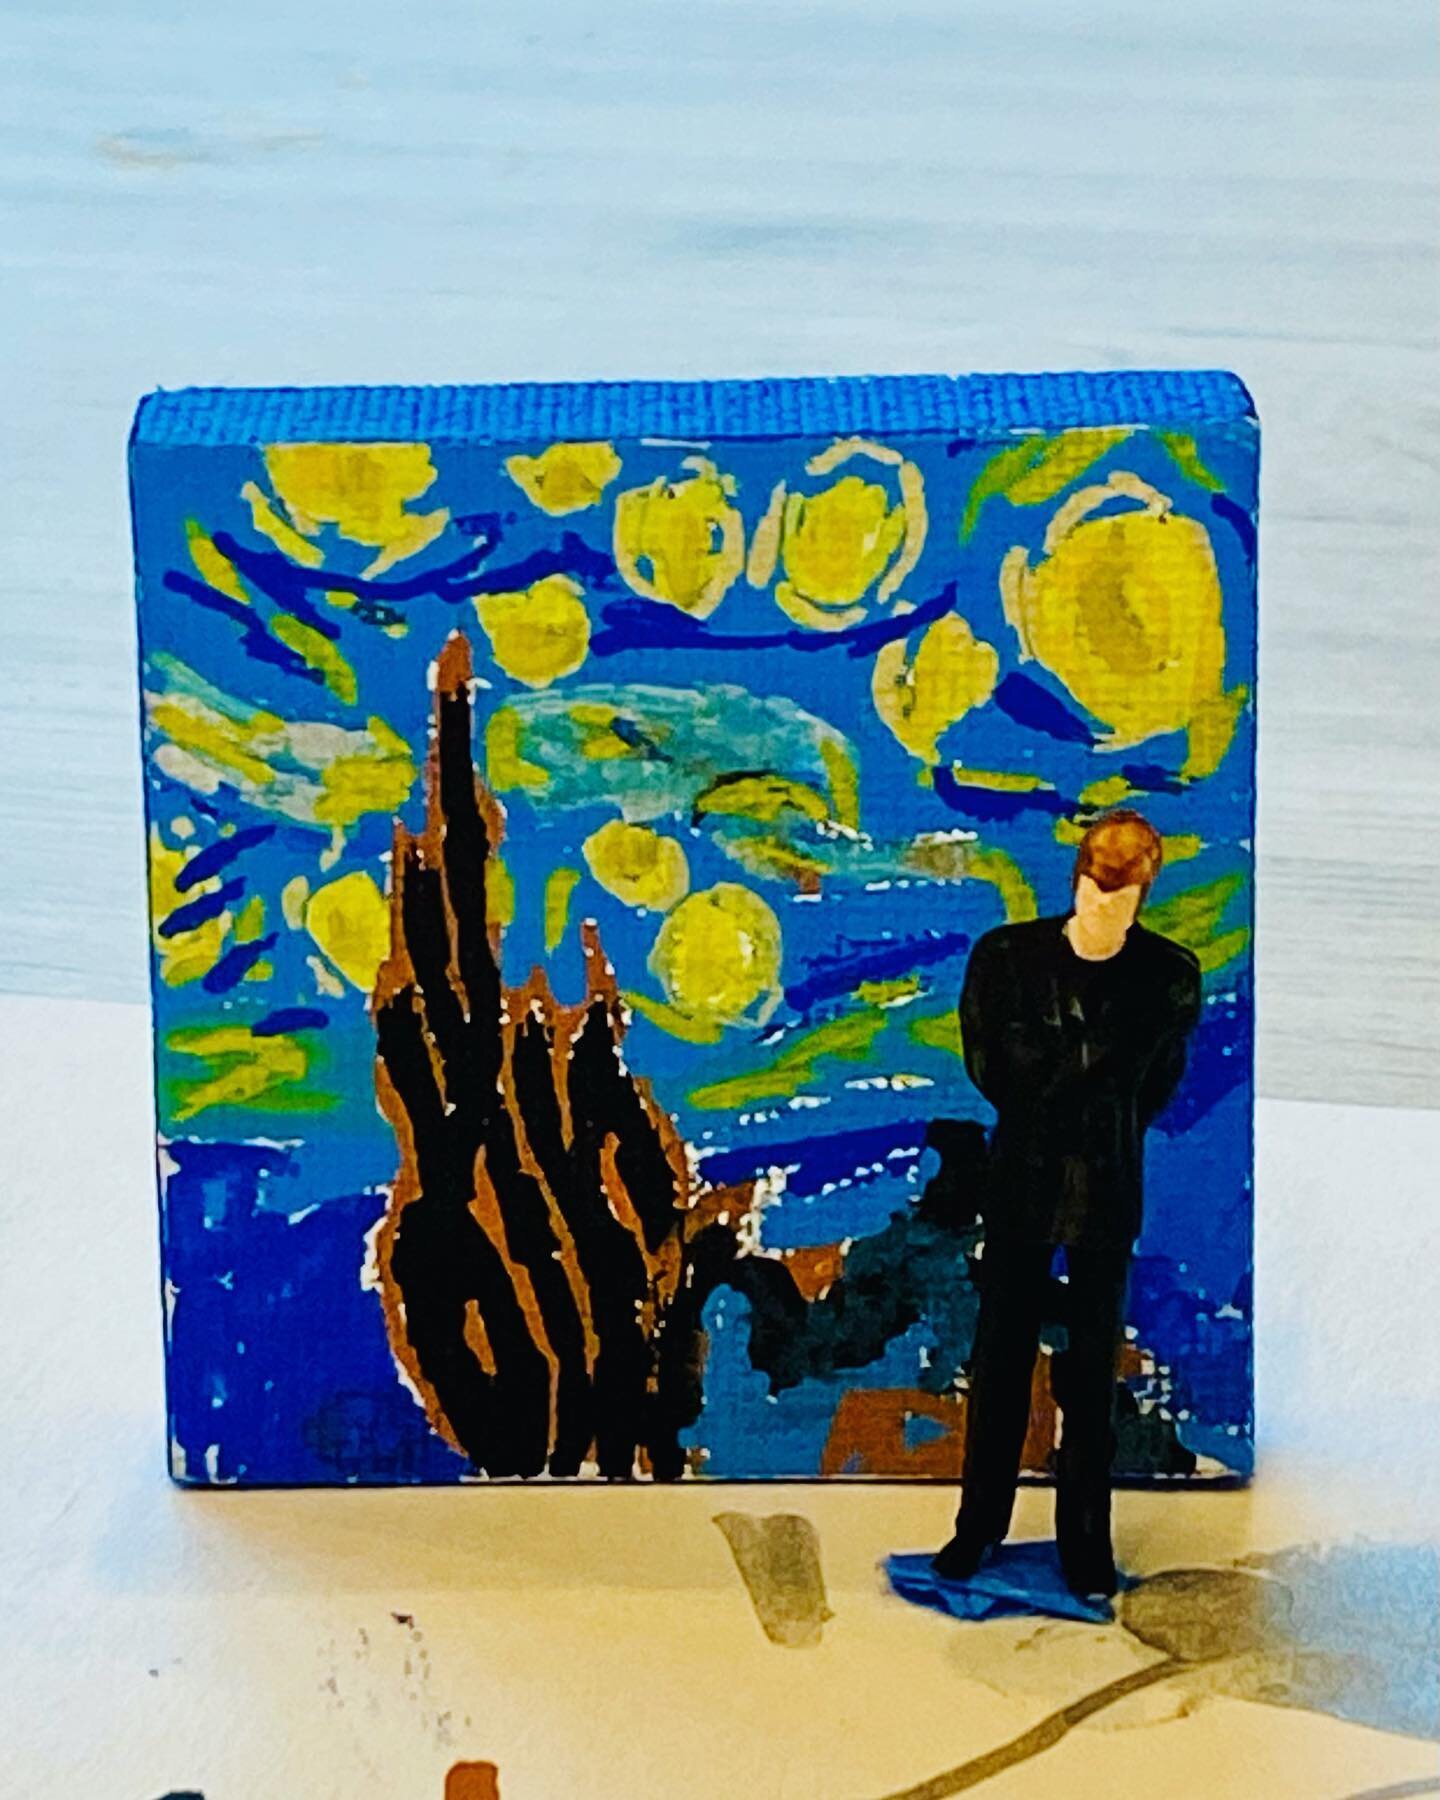 The 9/10 class started making tiny art tonight. The largest piece was a 2 inch square!
Each artist is responsible for the creative direction of their solo tiny art show and I love where they are headed!